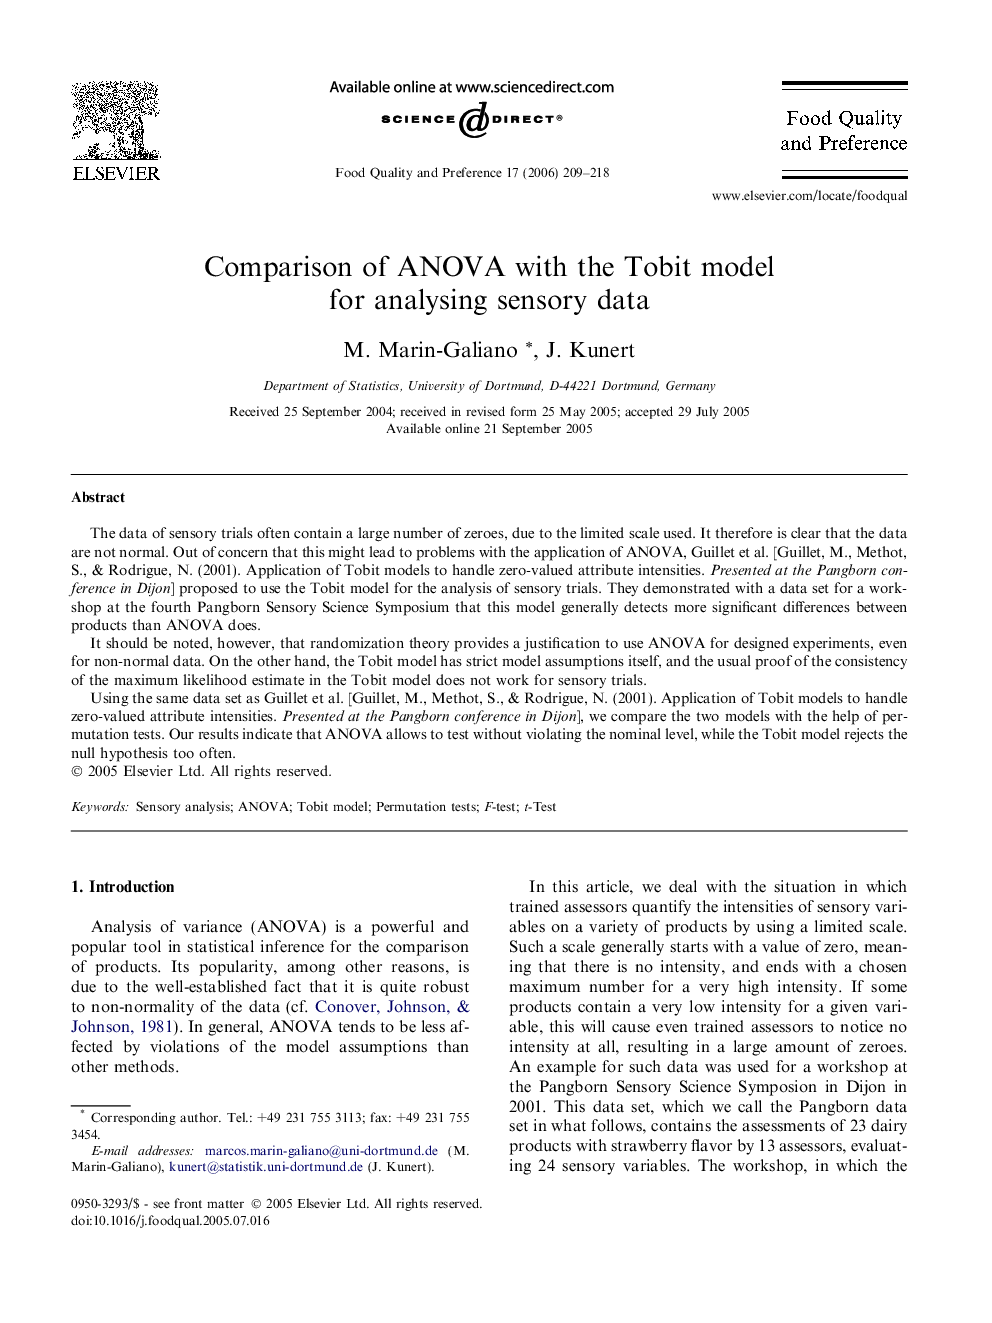 Comparison of ANOVA with the Tobit model for analysing sensory data